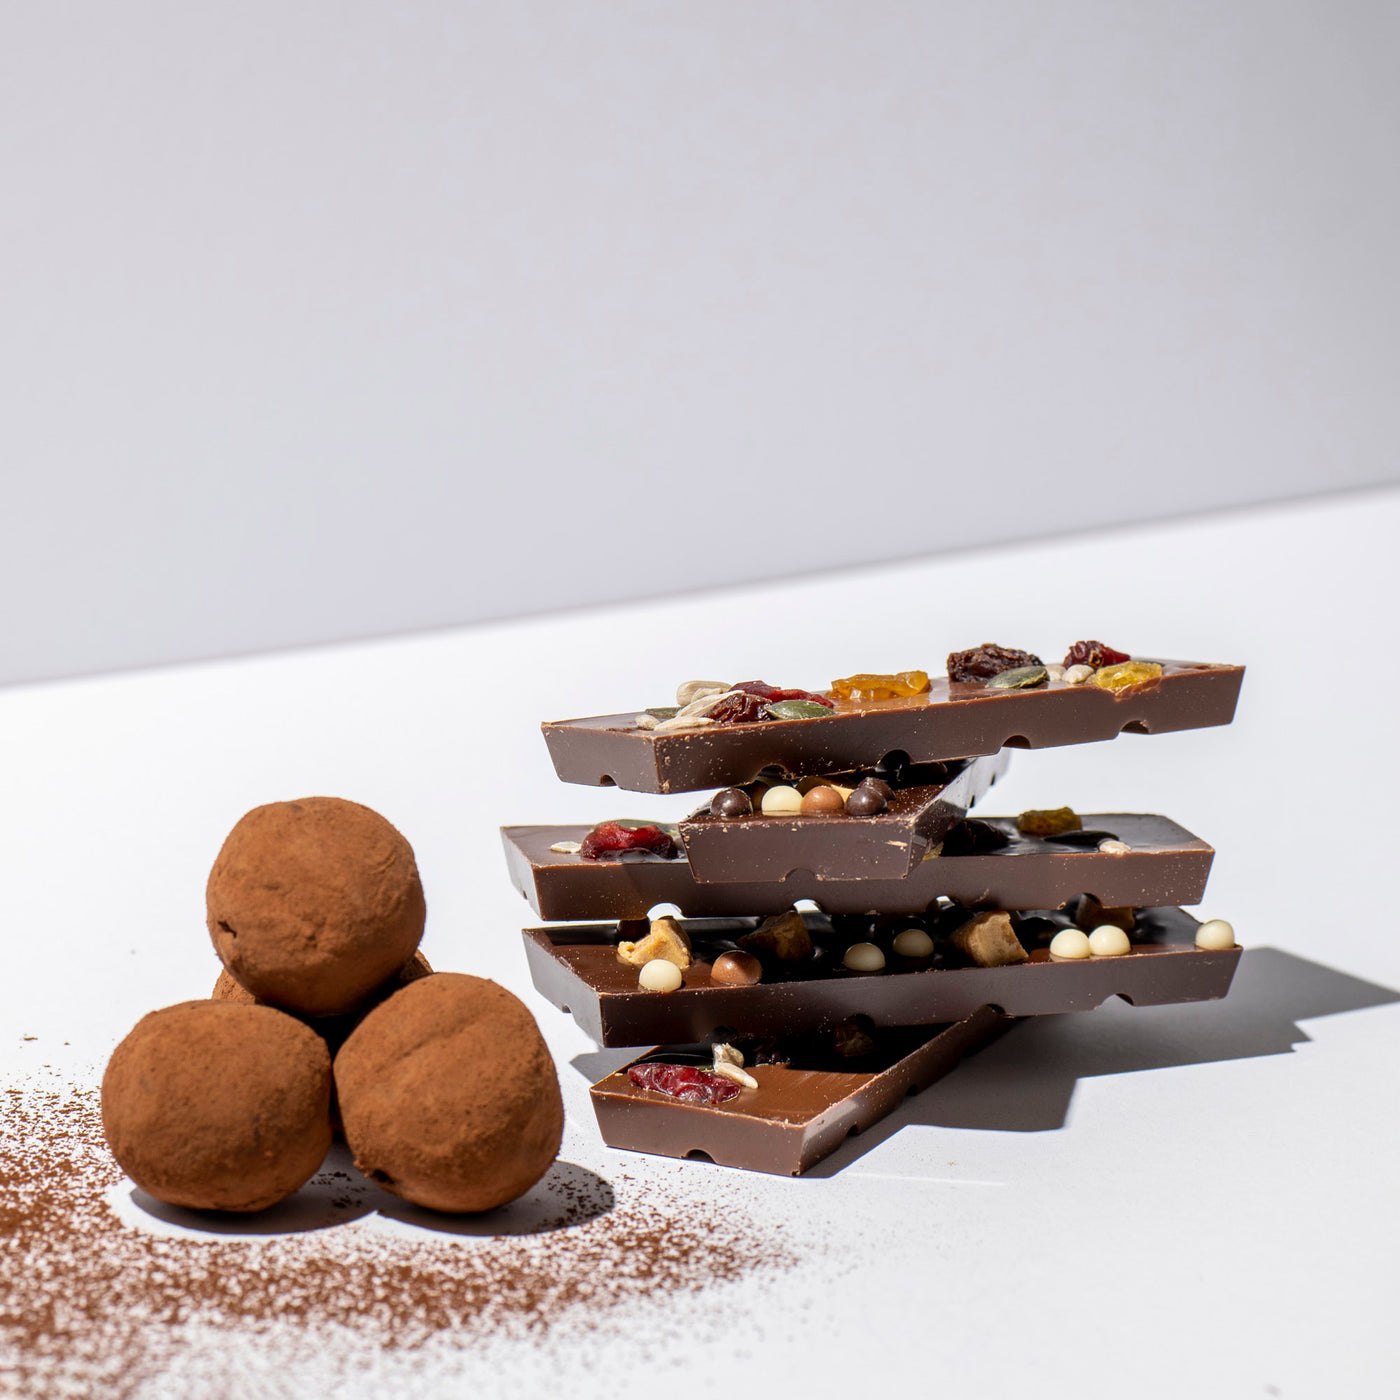 Chocolate Masterclass Voucher for One - at The Artisan Bakehouse